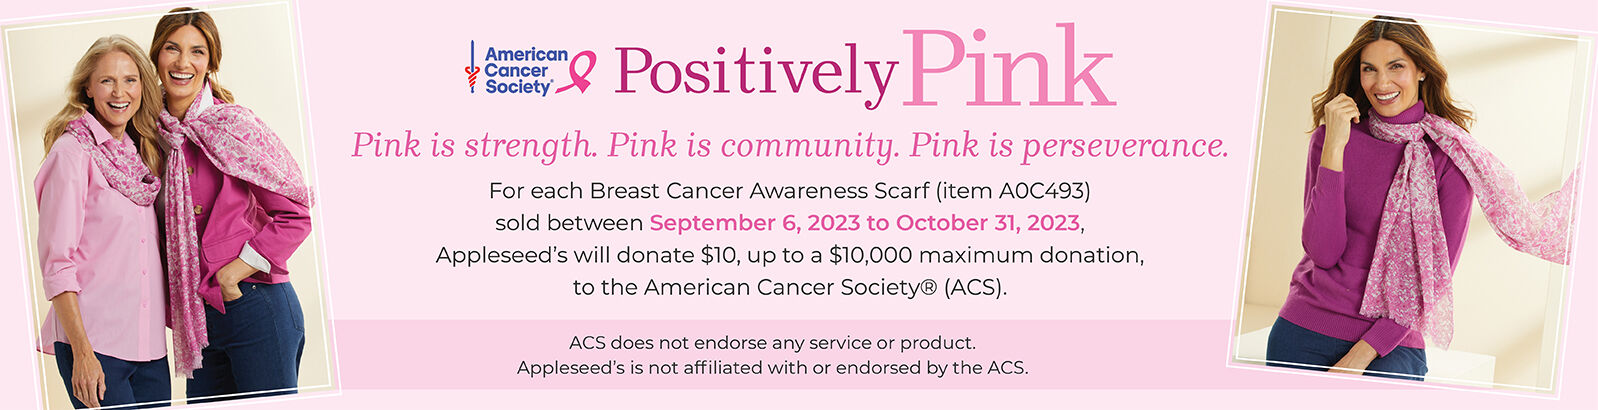 american cancer society positively pink pink is strength. pink is community. pink is perserverance. for each breast cancer awareness scrarf (item A0C493) sold between September 6, 2023 to October 31, 2023, Appleseed's will donate $10, up to a $10,000 maximum donation, to the american cancer society. acs does not endorse any service or product. Appleseed's is not affiliated with or endorsed by the ACS.